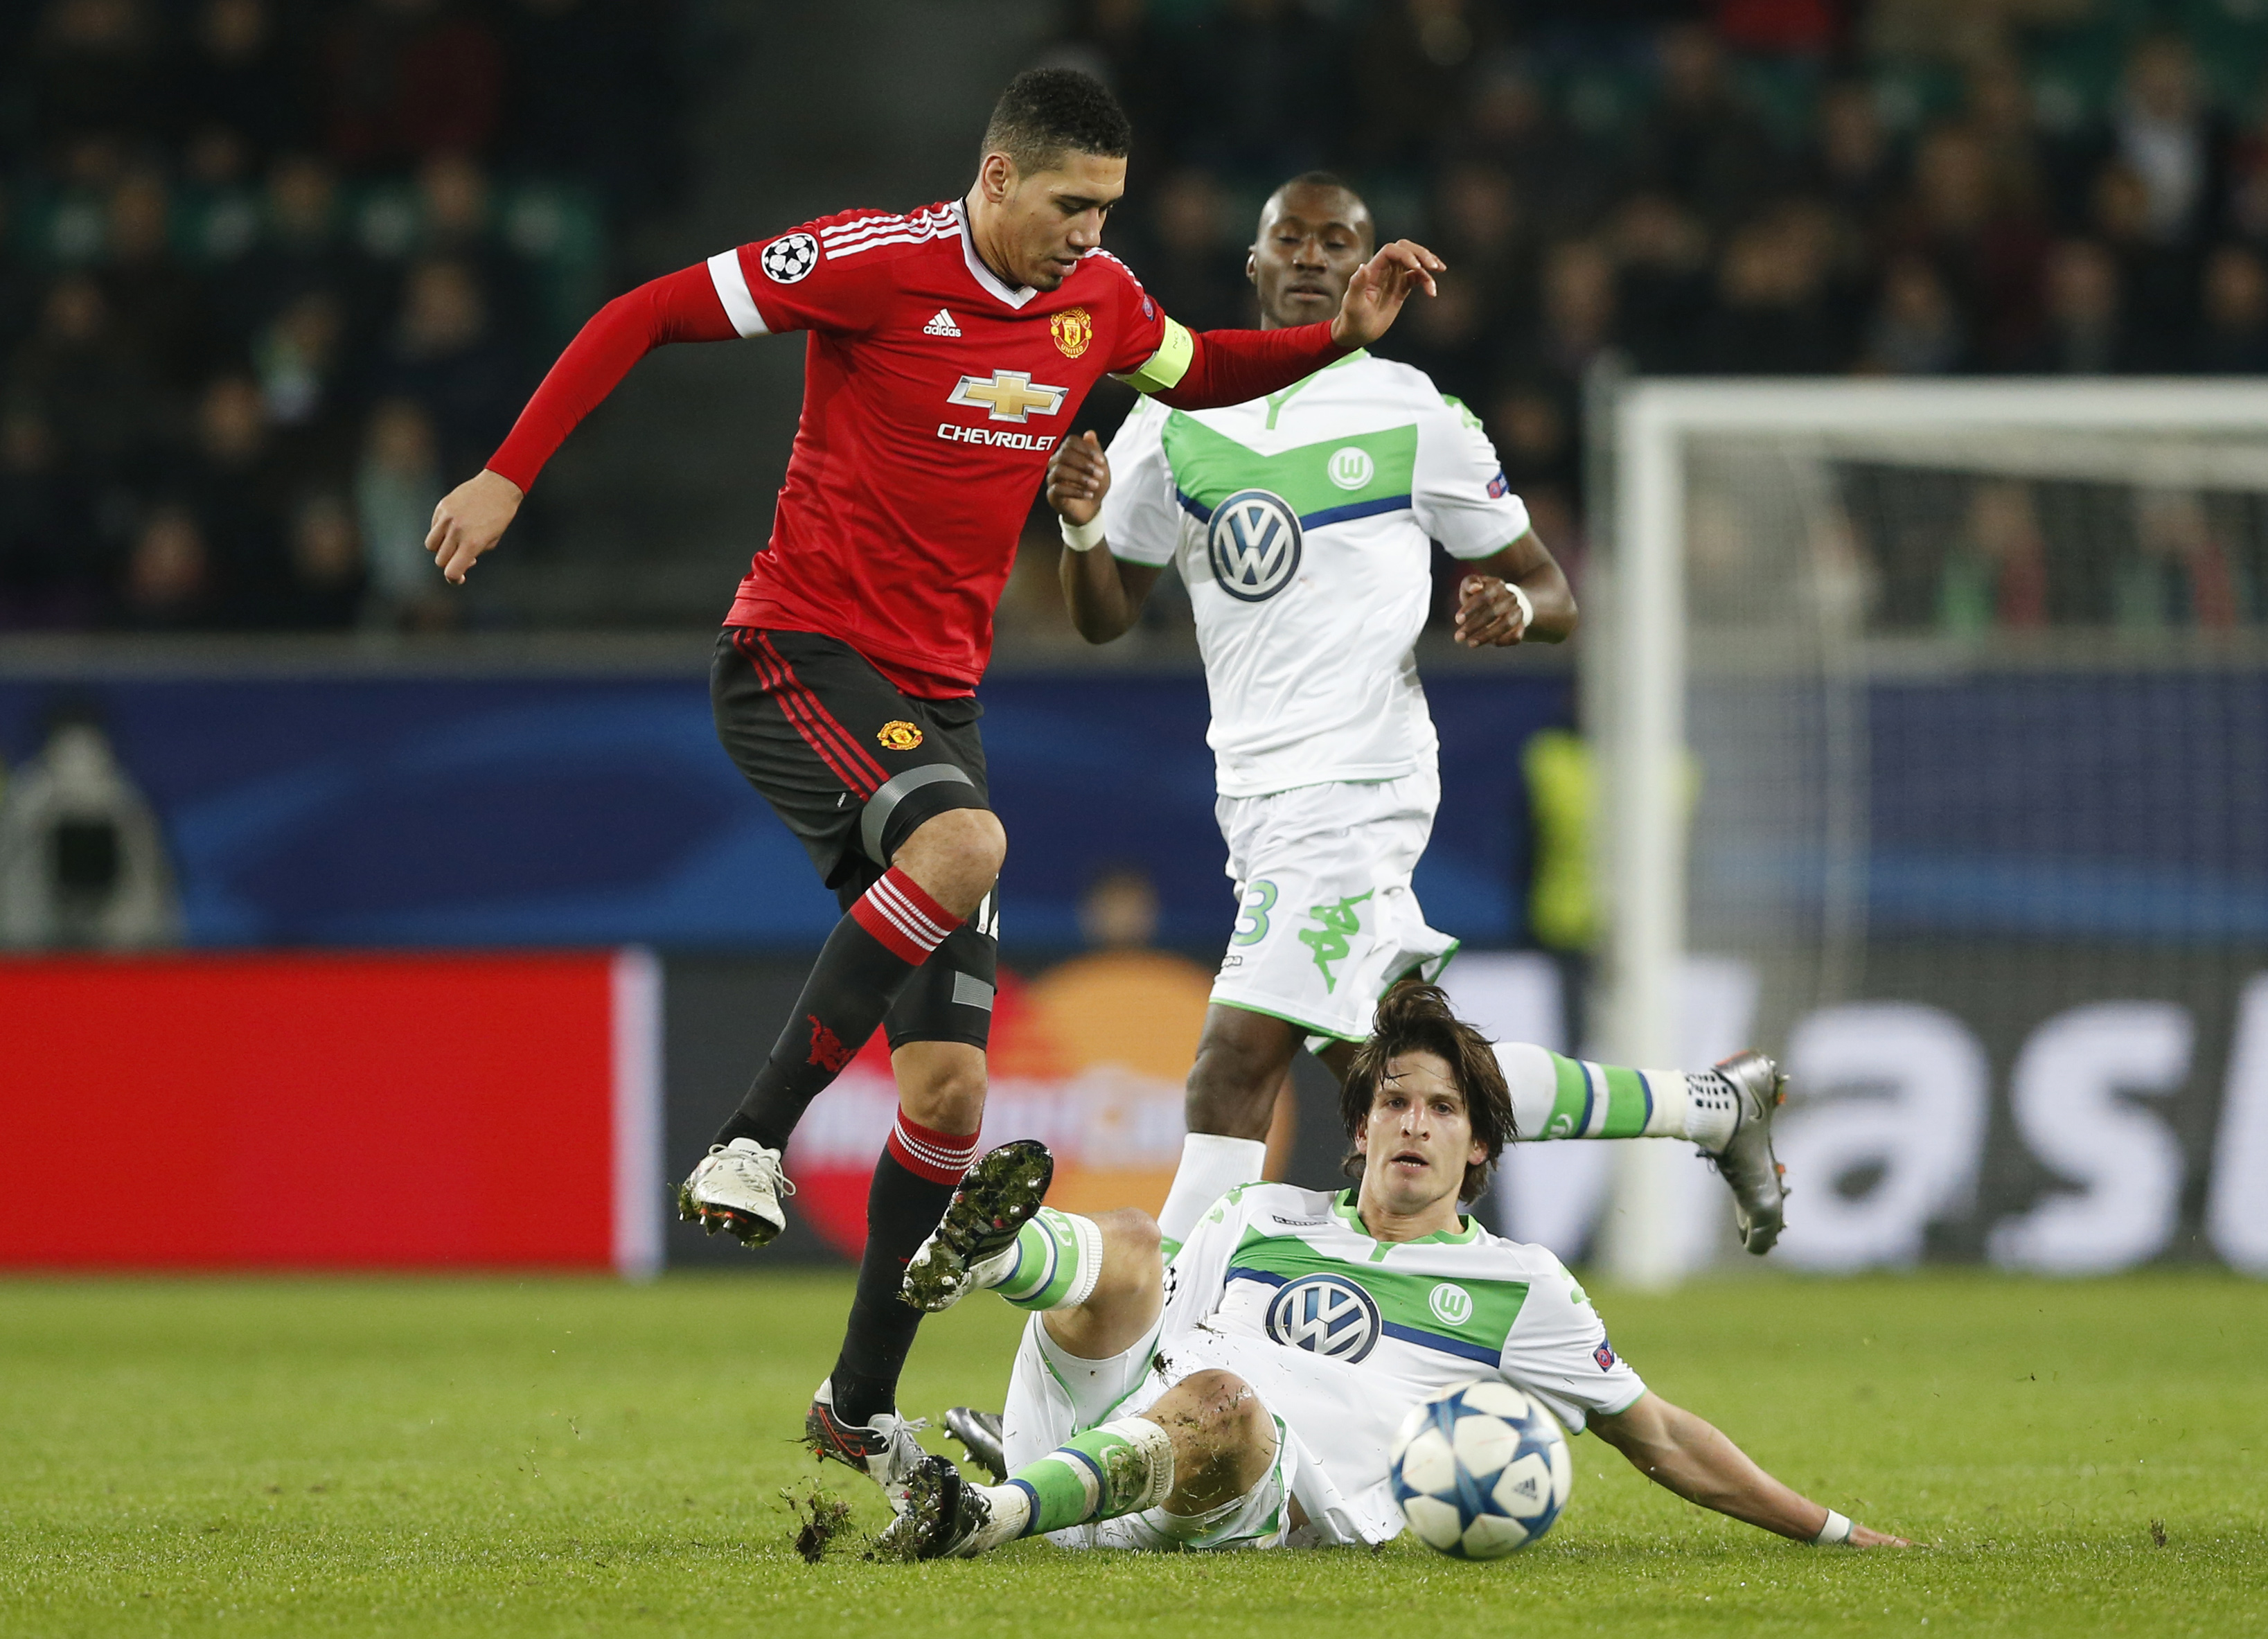 Manchester United's Chris Smalling sustains an injury during UEFA Champions League against Wolfsburg at Volkswagen-Arena on Tuesday, December 8, 2015. Photo: Reuters